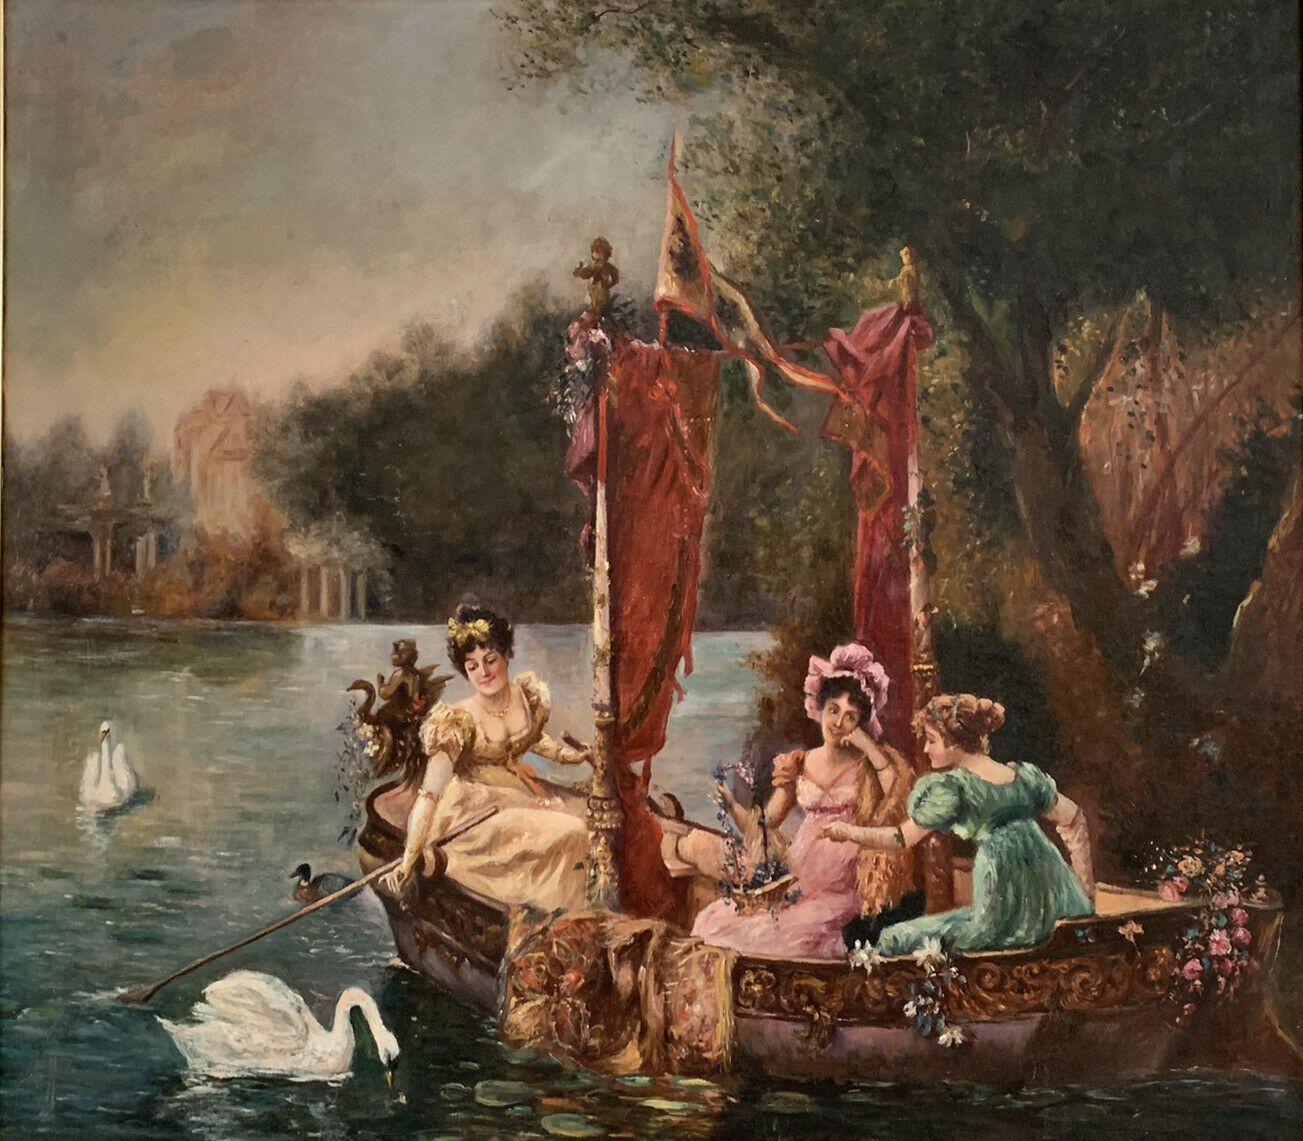 Unknown Portrait Painting - C. 1900 FRENCH BELLE EPOQUE HUGE OIL PAINTING - ELEGANT LADIES BOATING ON LAKE